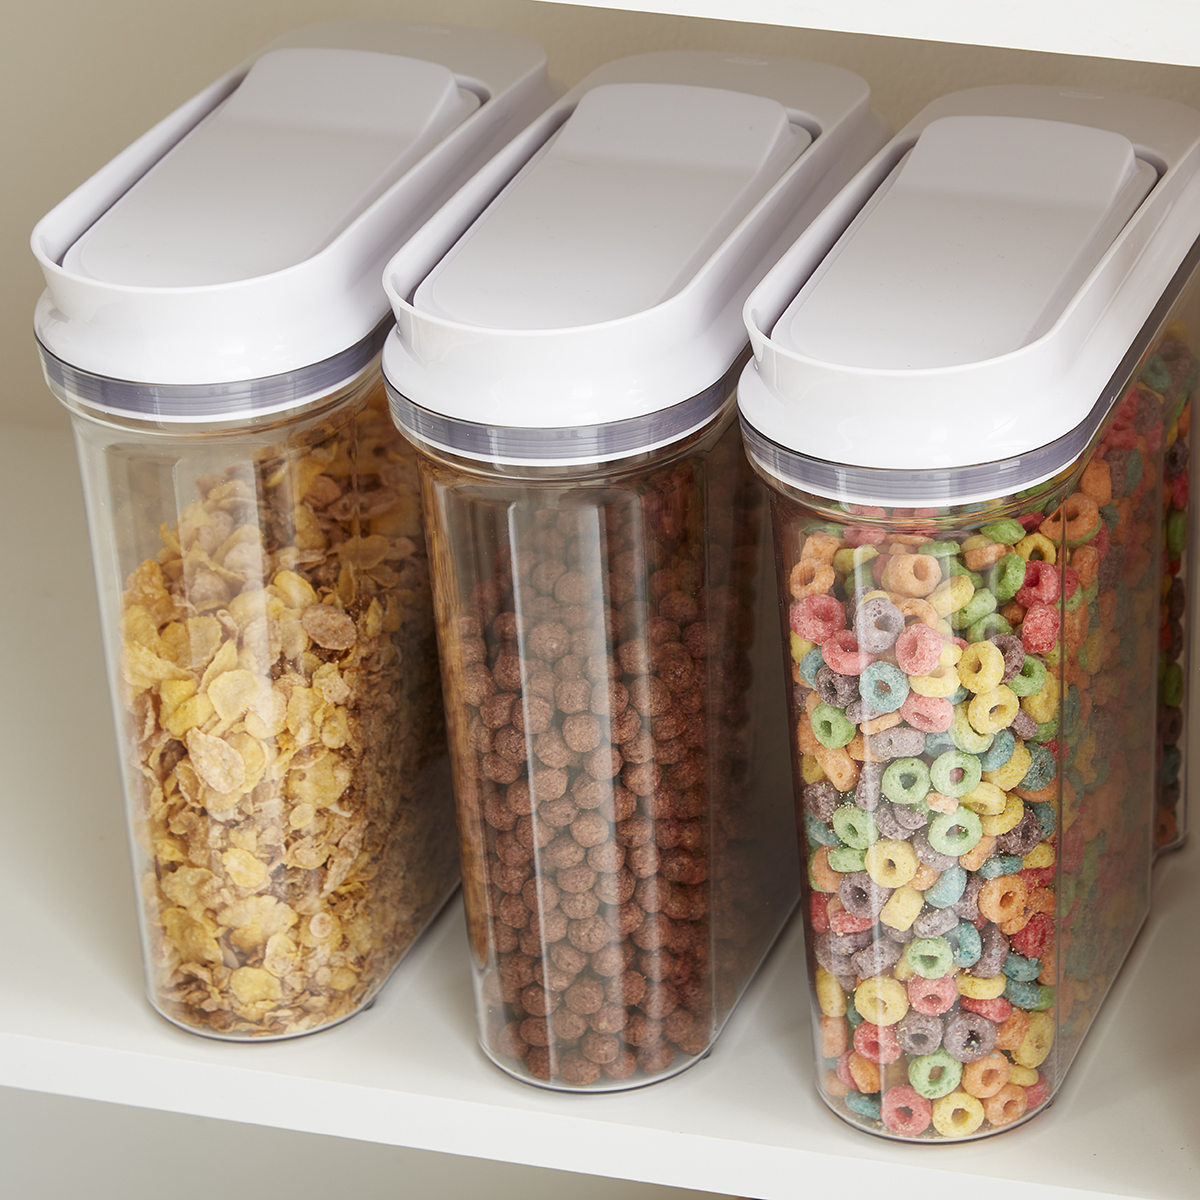 https://images.containerstore.com/catalogimages/357266/GW_18_Pantry-Hyacynth-Bins_Details_R.jpg